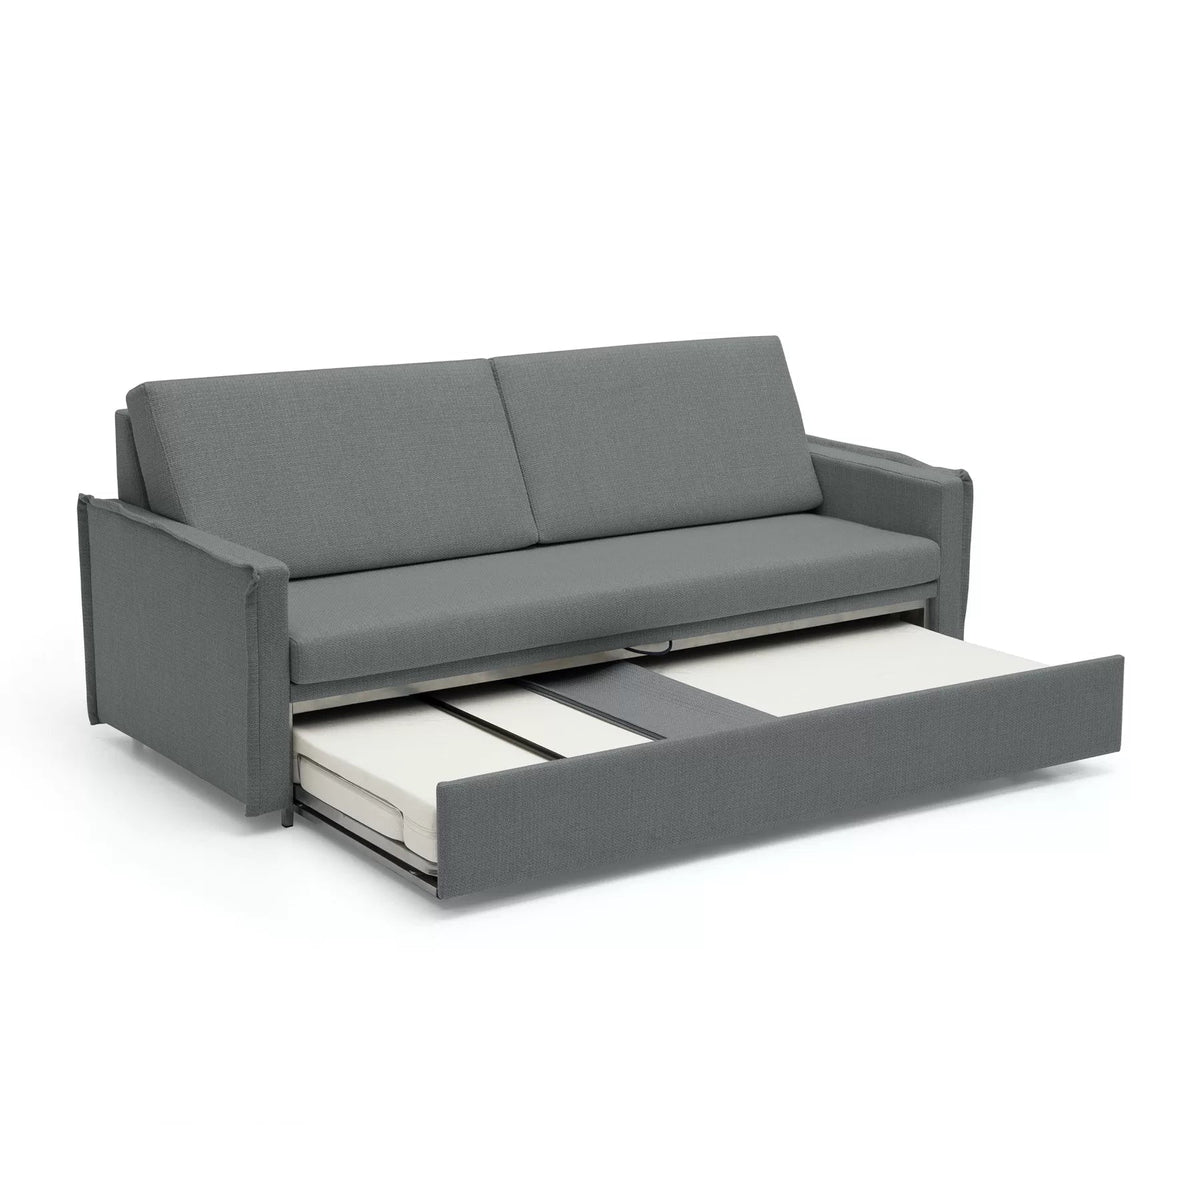 Beth 921 Sofa Bed-TM Leader-Contract Furniture Store